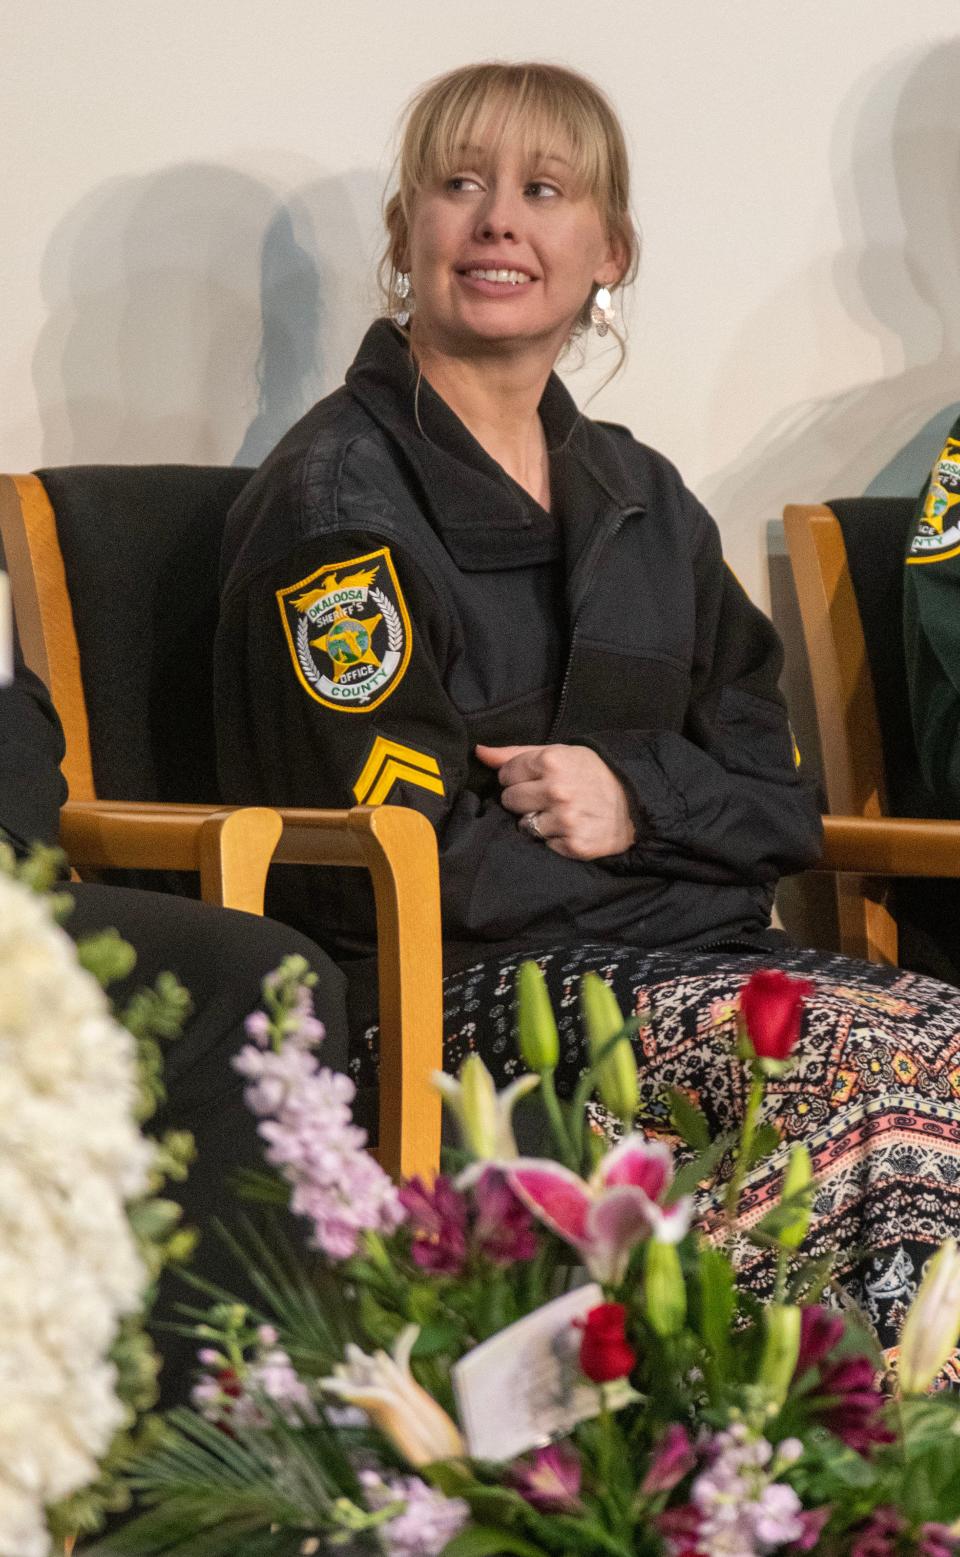 Renee Hamilton listens to stories about her husband during the Visitation and Celebration of Life for Okaloosa Deputy Ray Hamilton at Destin-Fort Walton Beach Convention Center Saturday, December 31, 2022. Deputy Hamilton was killed in the line of duty December 24, 2022.